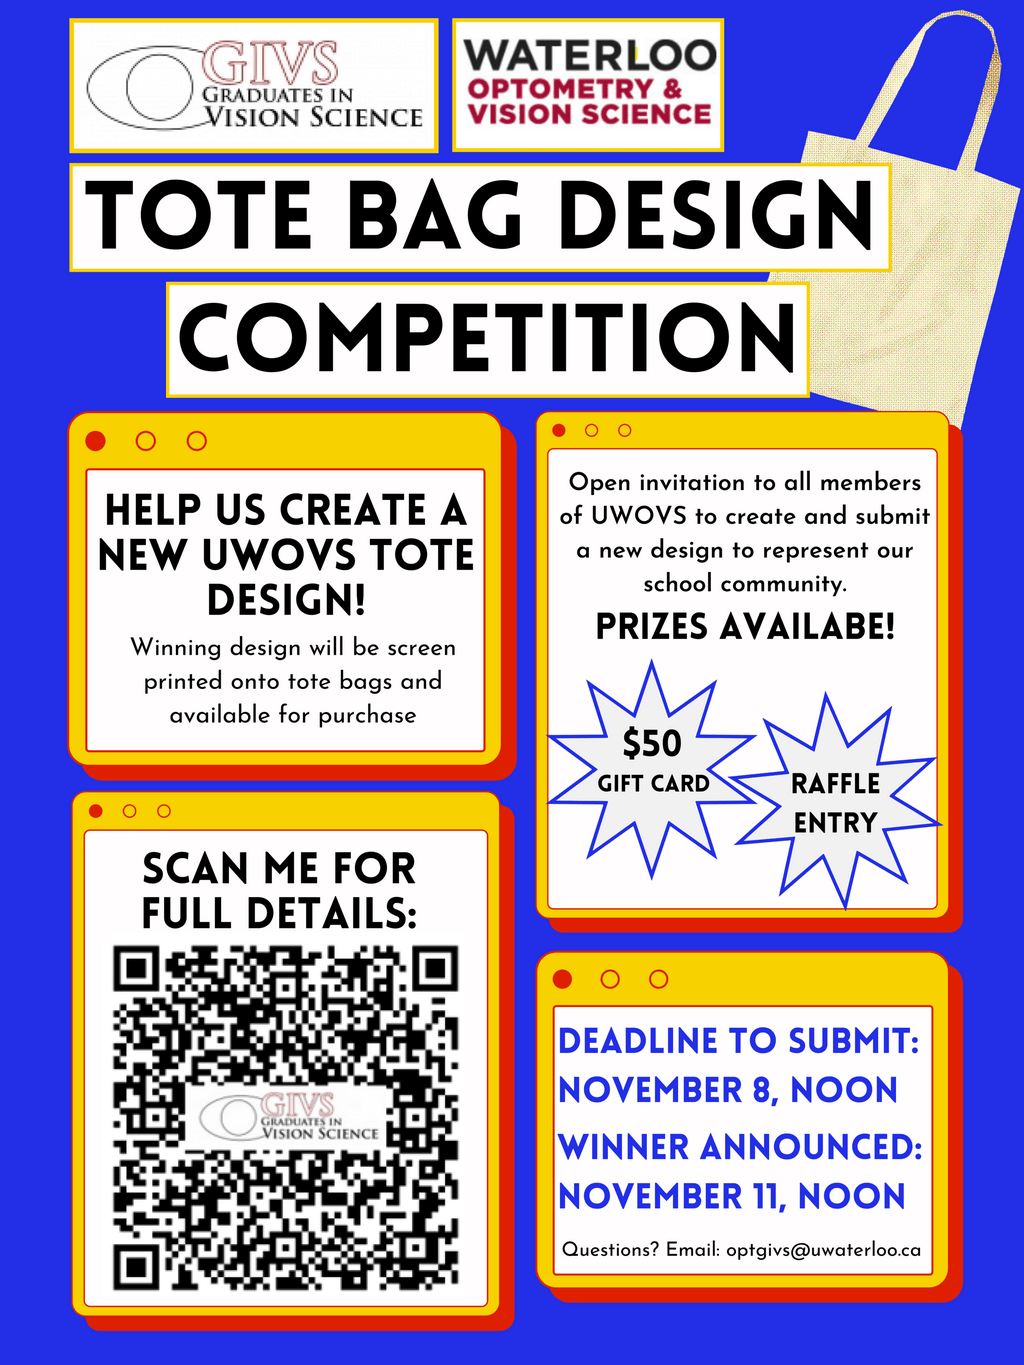 GIVS tote bag design competition poster